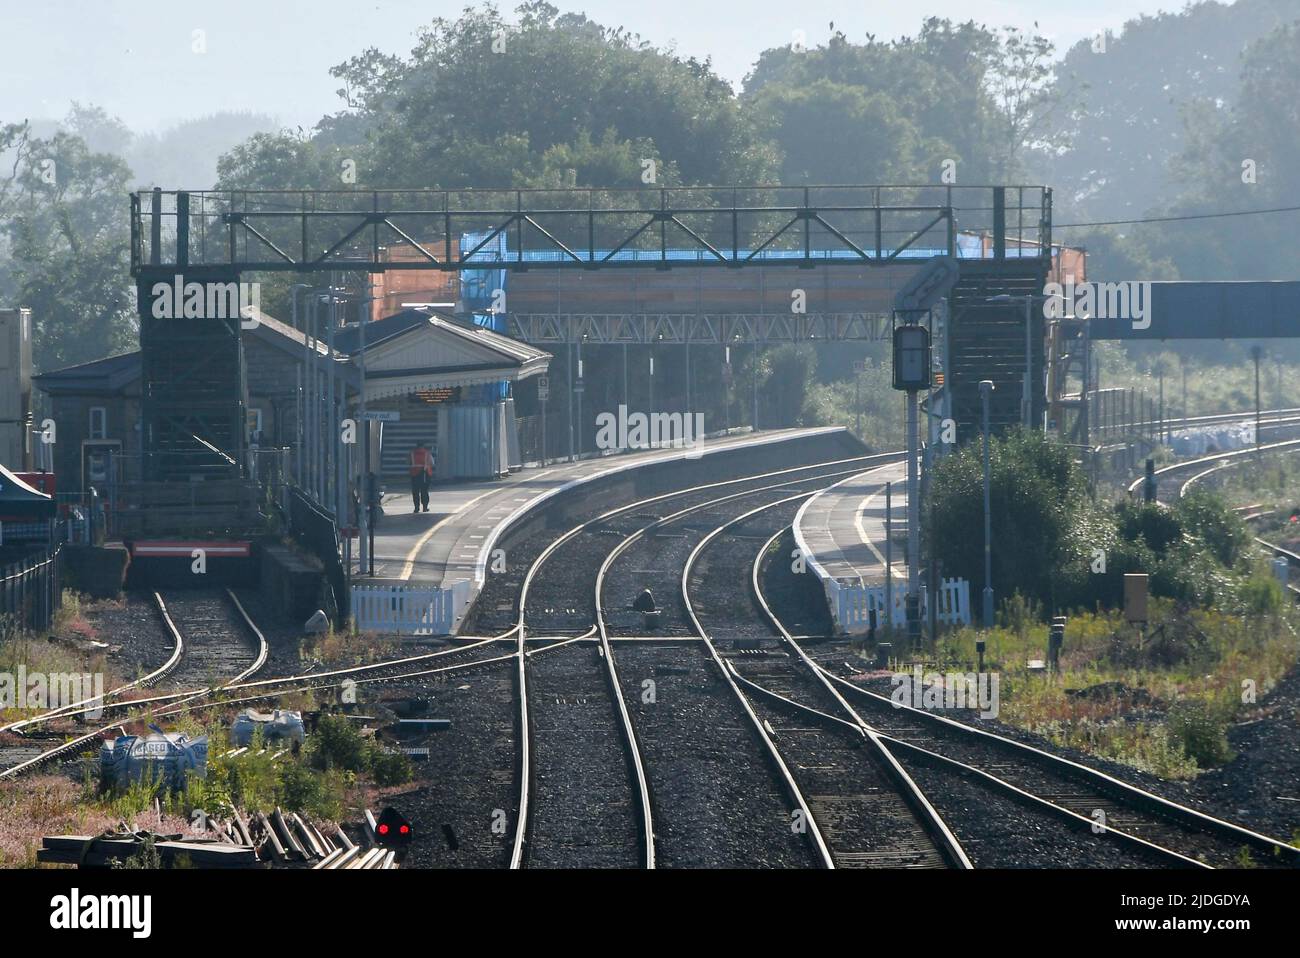 Castle Cary, Somerset, UK.  21st June 2022.  General view of Castle Cary Station in Somerset which is getting ready for the influx of crowds going to Glastonbury Festival on the first day of the RMT rail strike.  The first train in today with festivalgoers is expected around midday.  Picture Credit: Graham Hunt/Alamy Live News Stock Photo